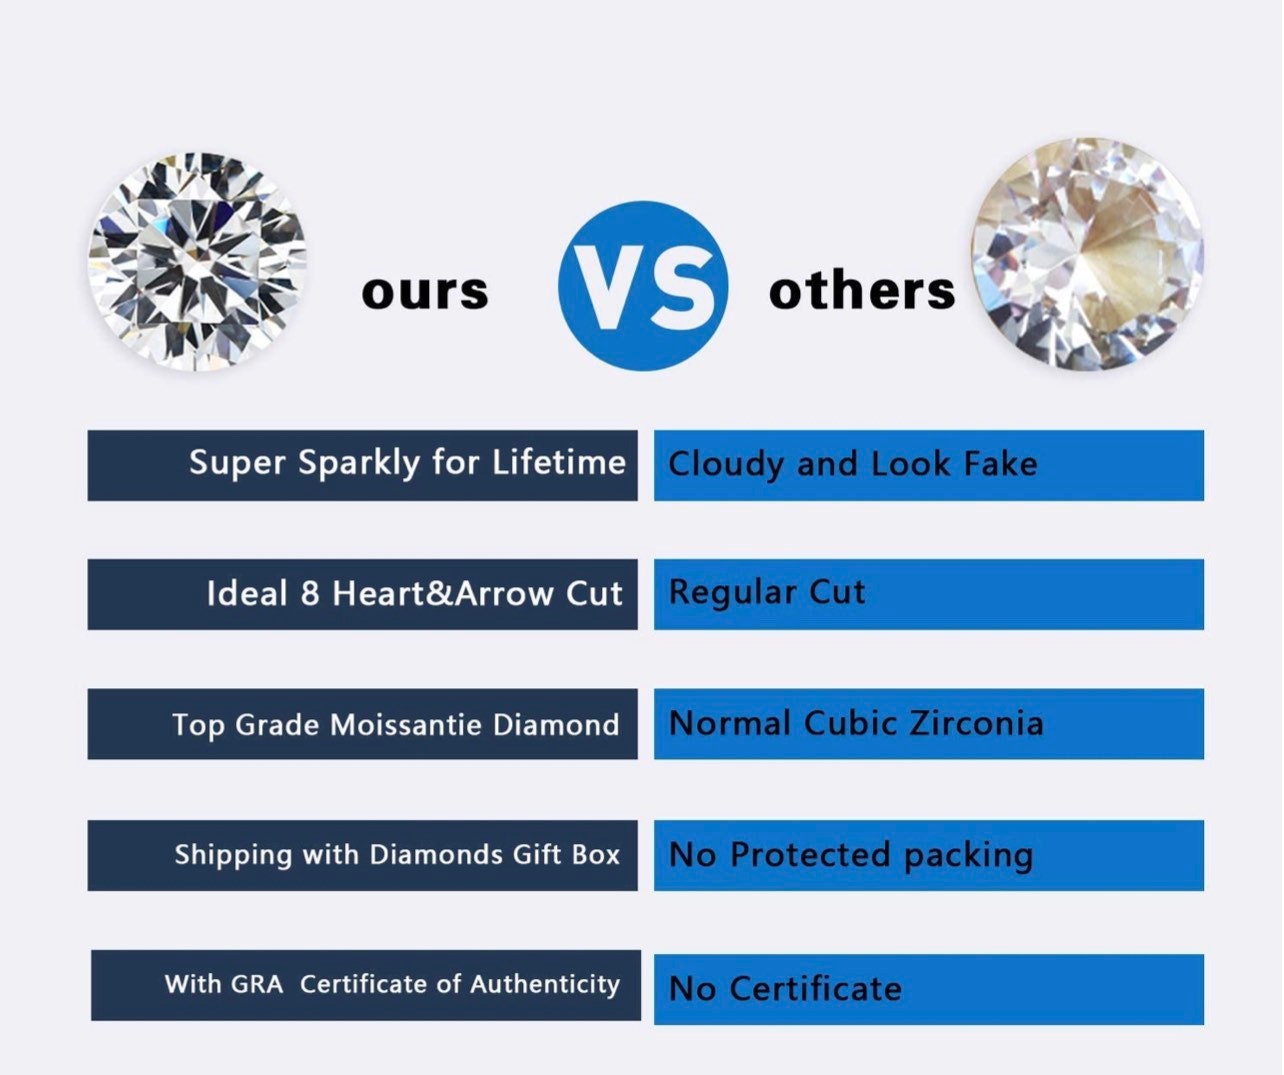 Vvs GRA certified 1ct Moissanite brilliant cut made in the USA Mesmerizing diamond earrings 5mm each stud Best gift ever! Unbeatable price